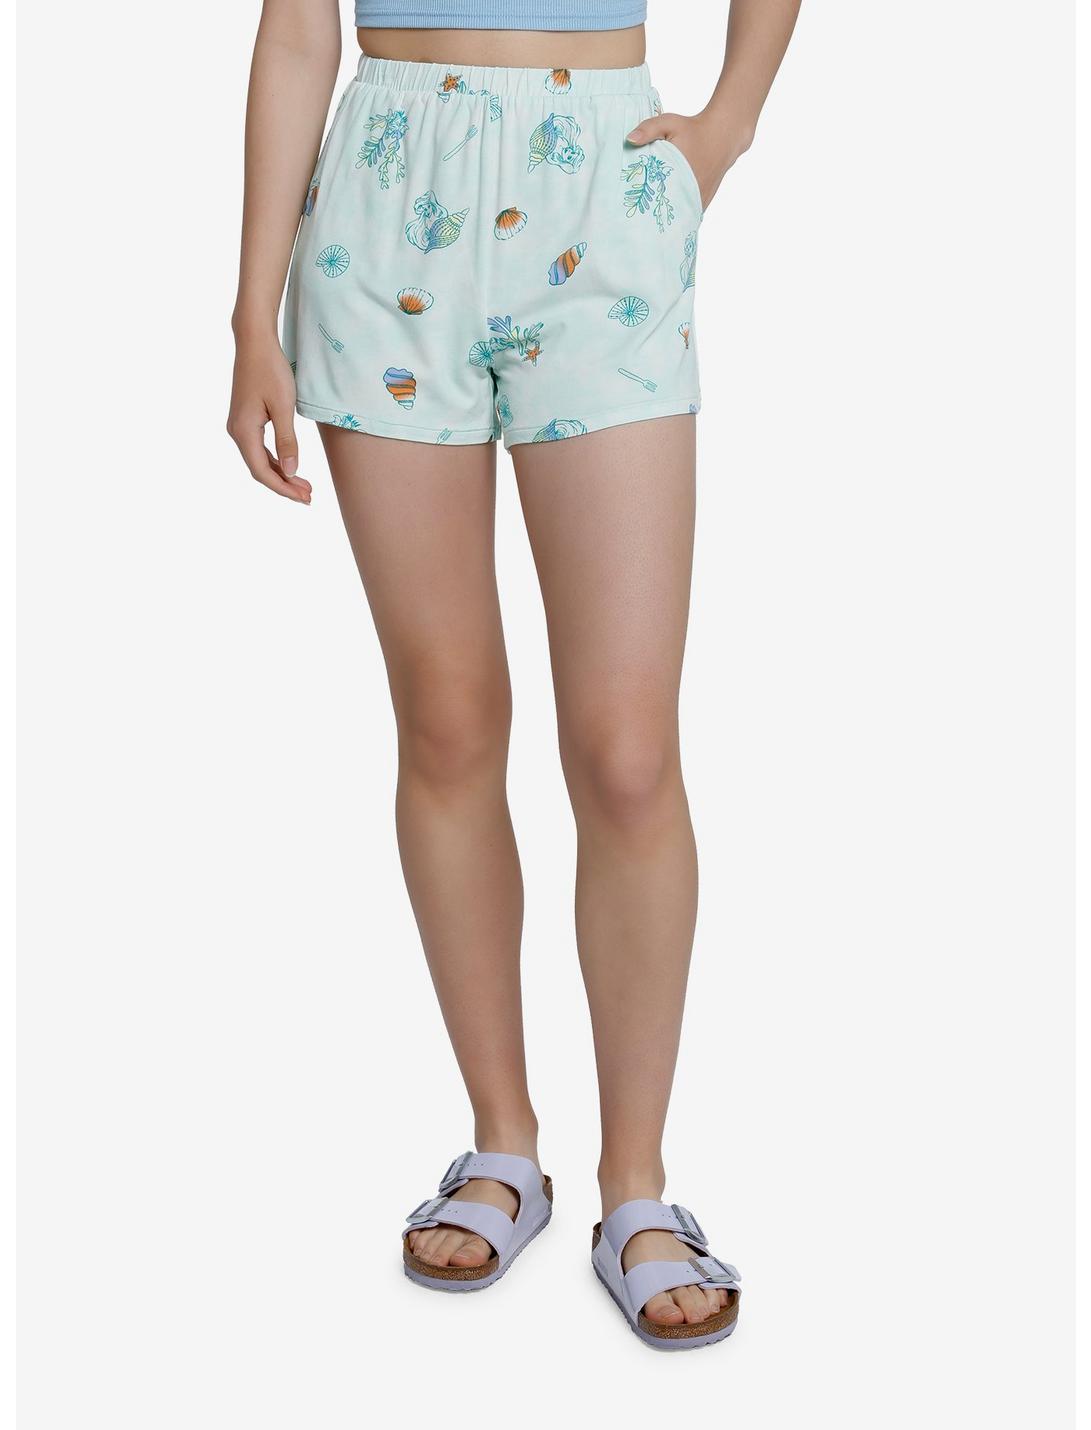 Her Universe Disney The Little Mermaid Icons Lounge Shorts Her Universe Exclusive, MULTI, hi-res